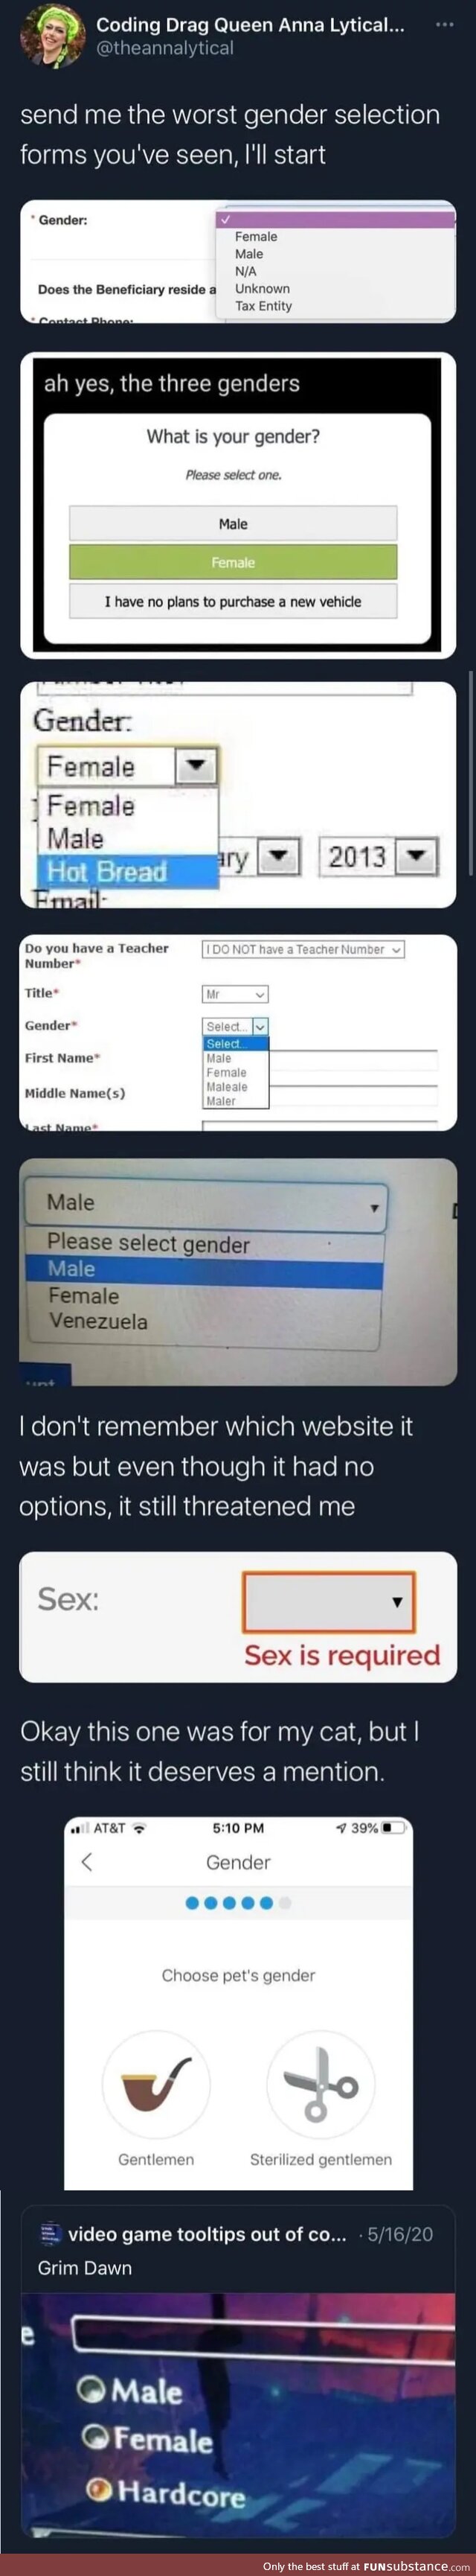 New gender dropped